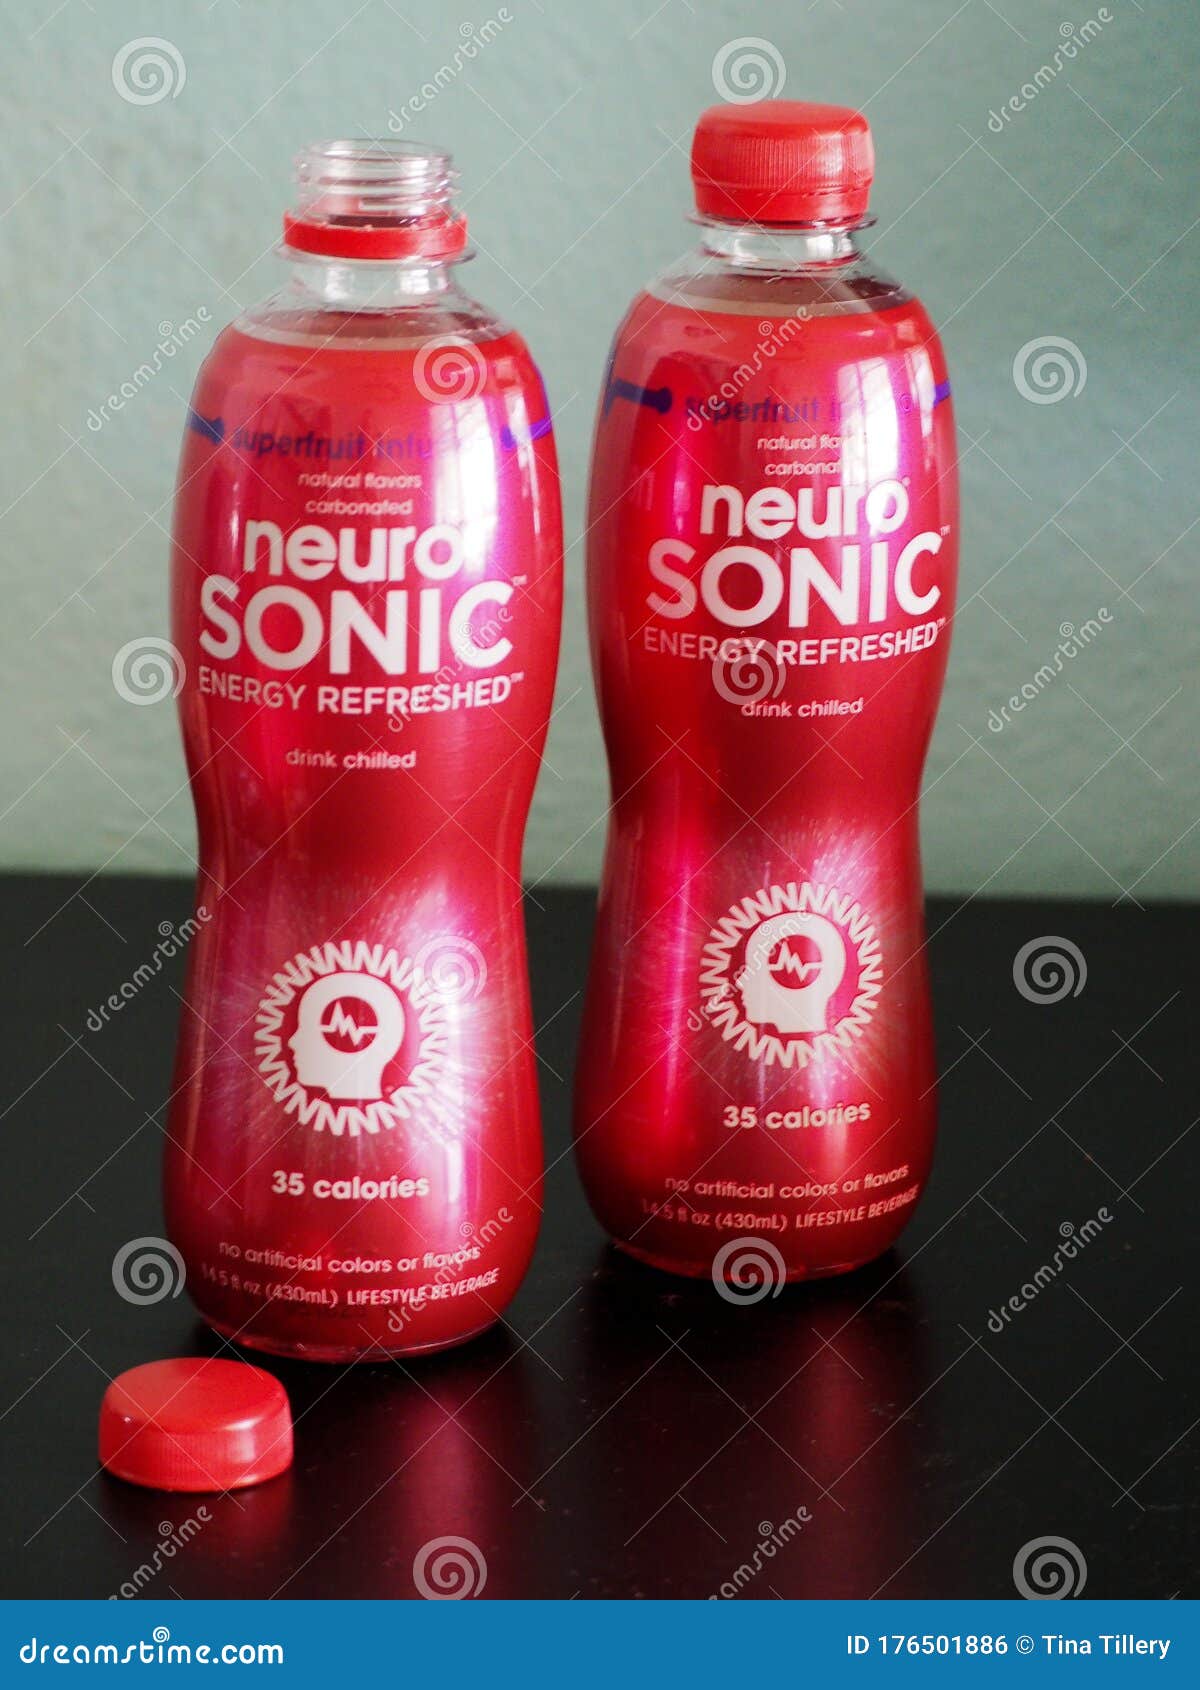 Neuro Sonic Energy Refreshed Drink Bottles Editorial Photo - Image